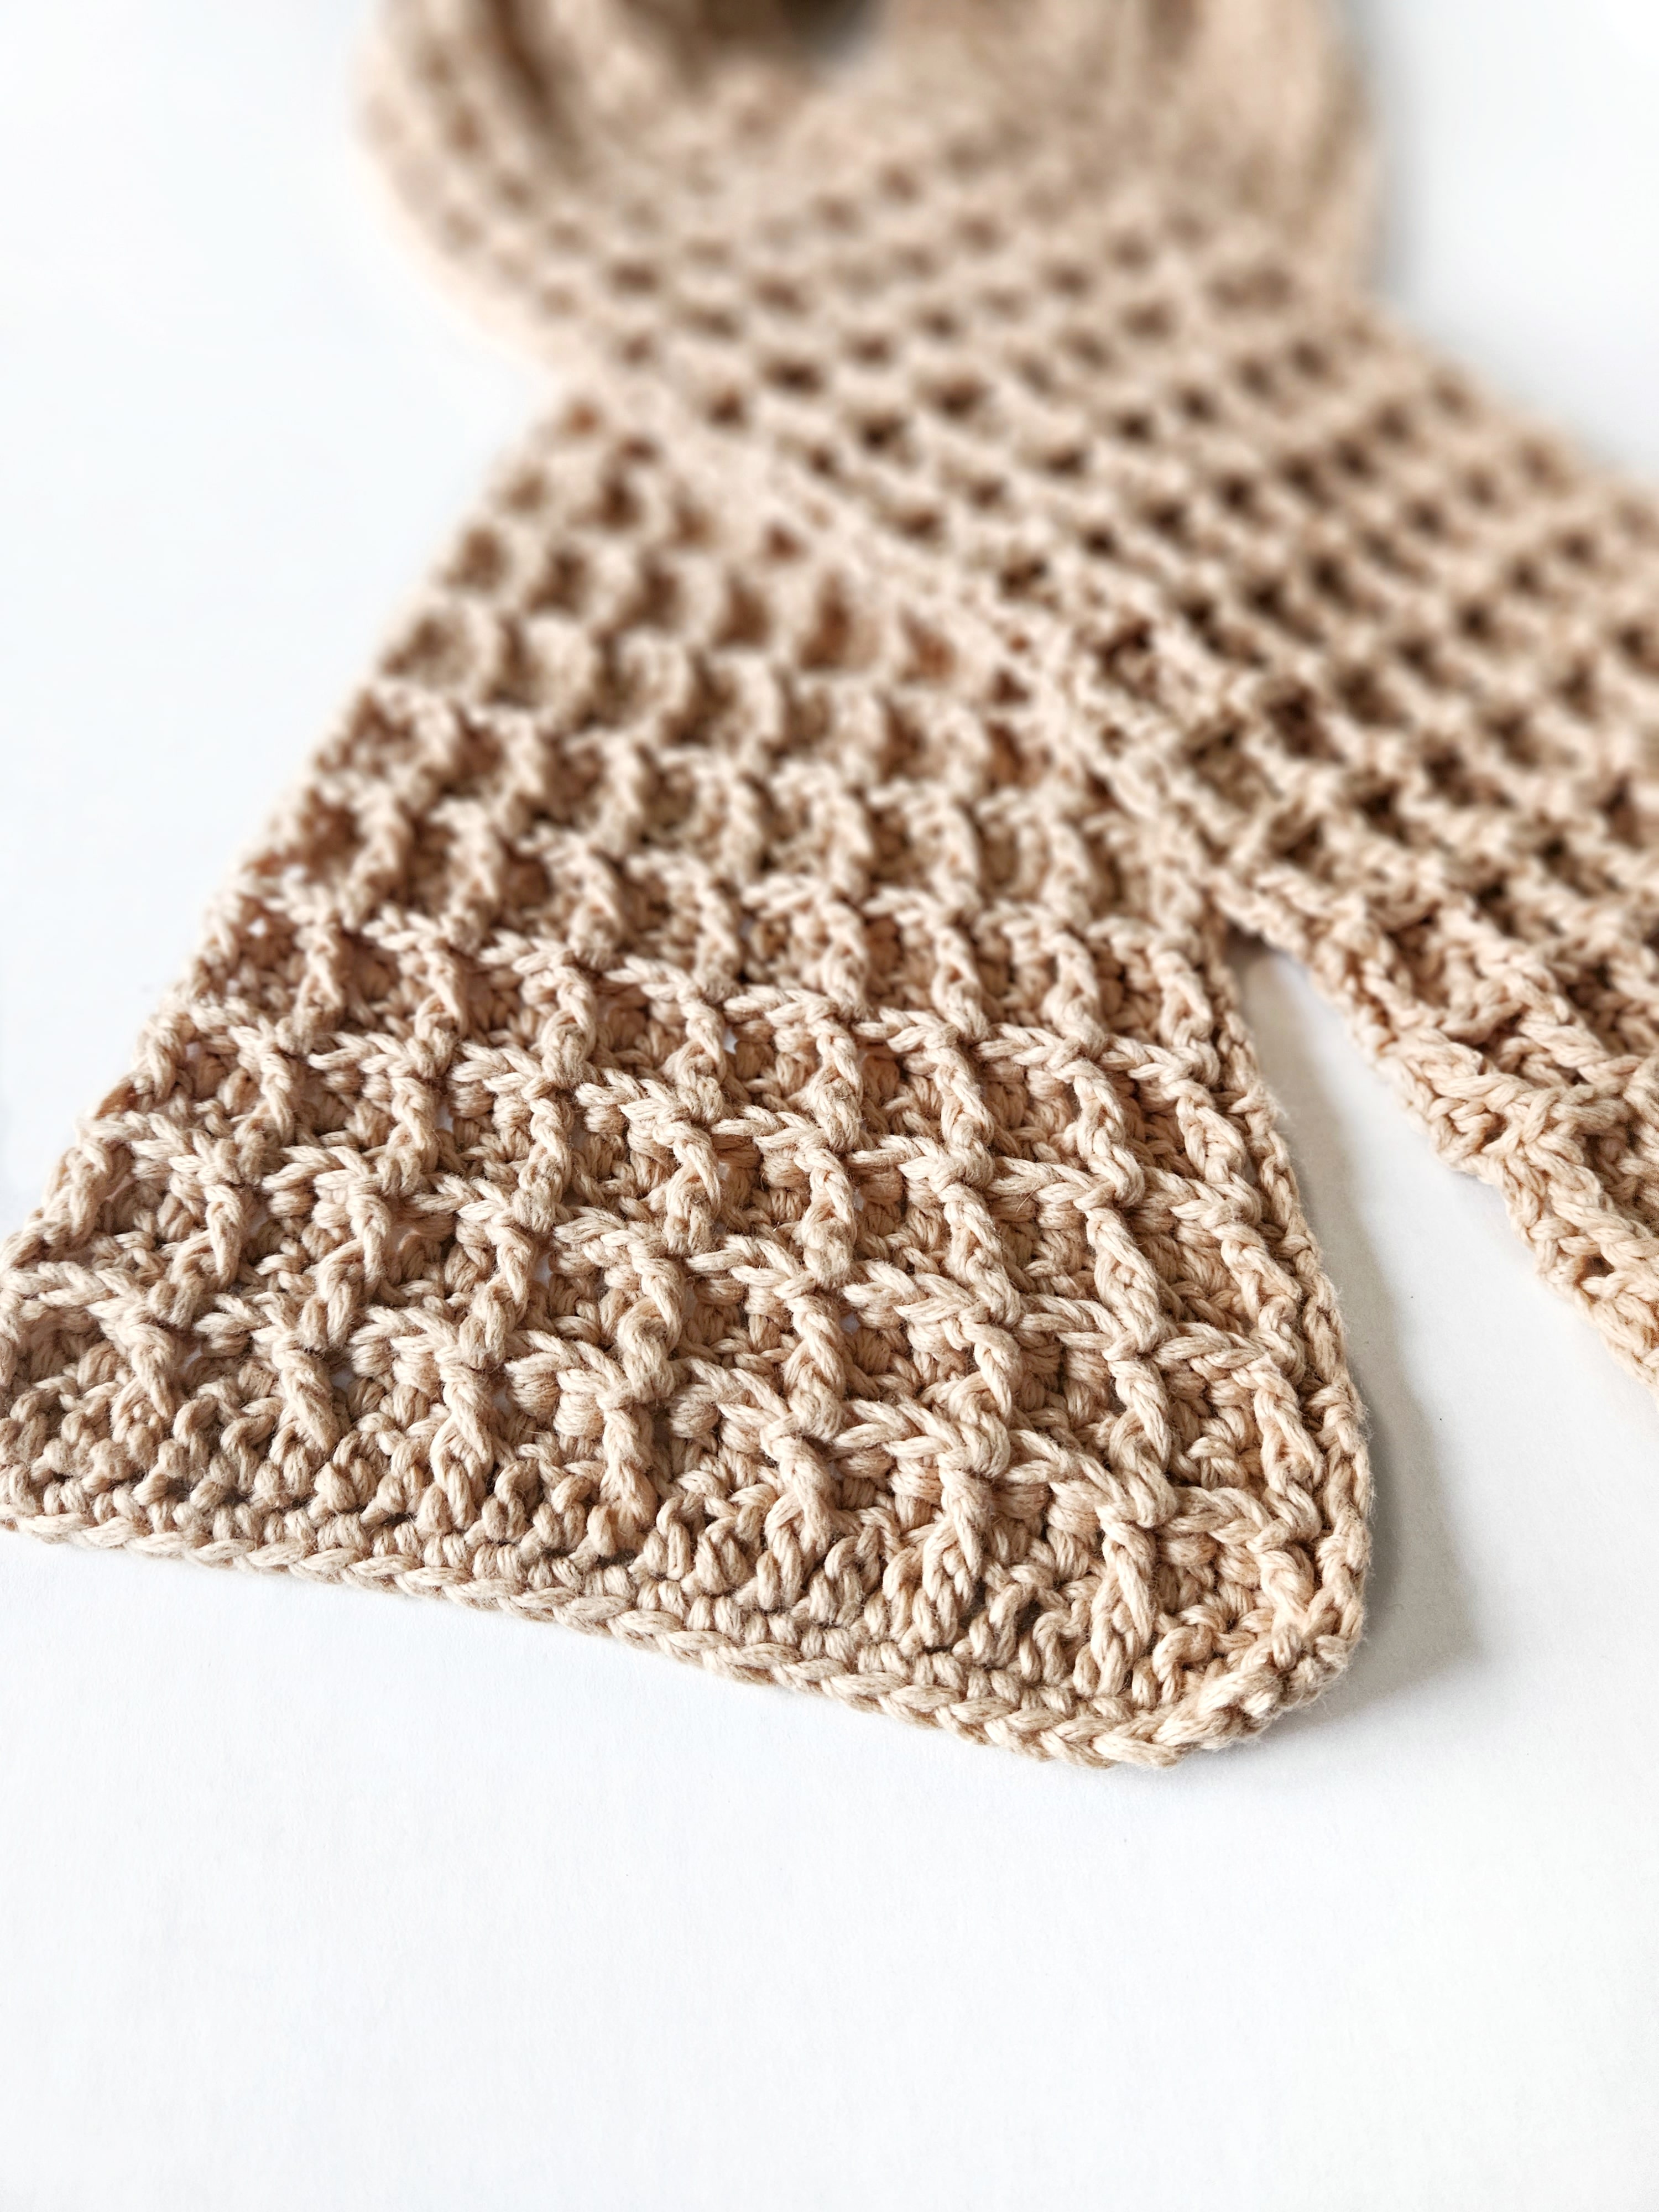 12 Beginner-Friendly Crochet Patterns - Whistle and Ivy